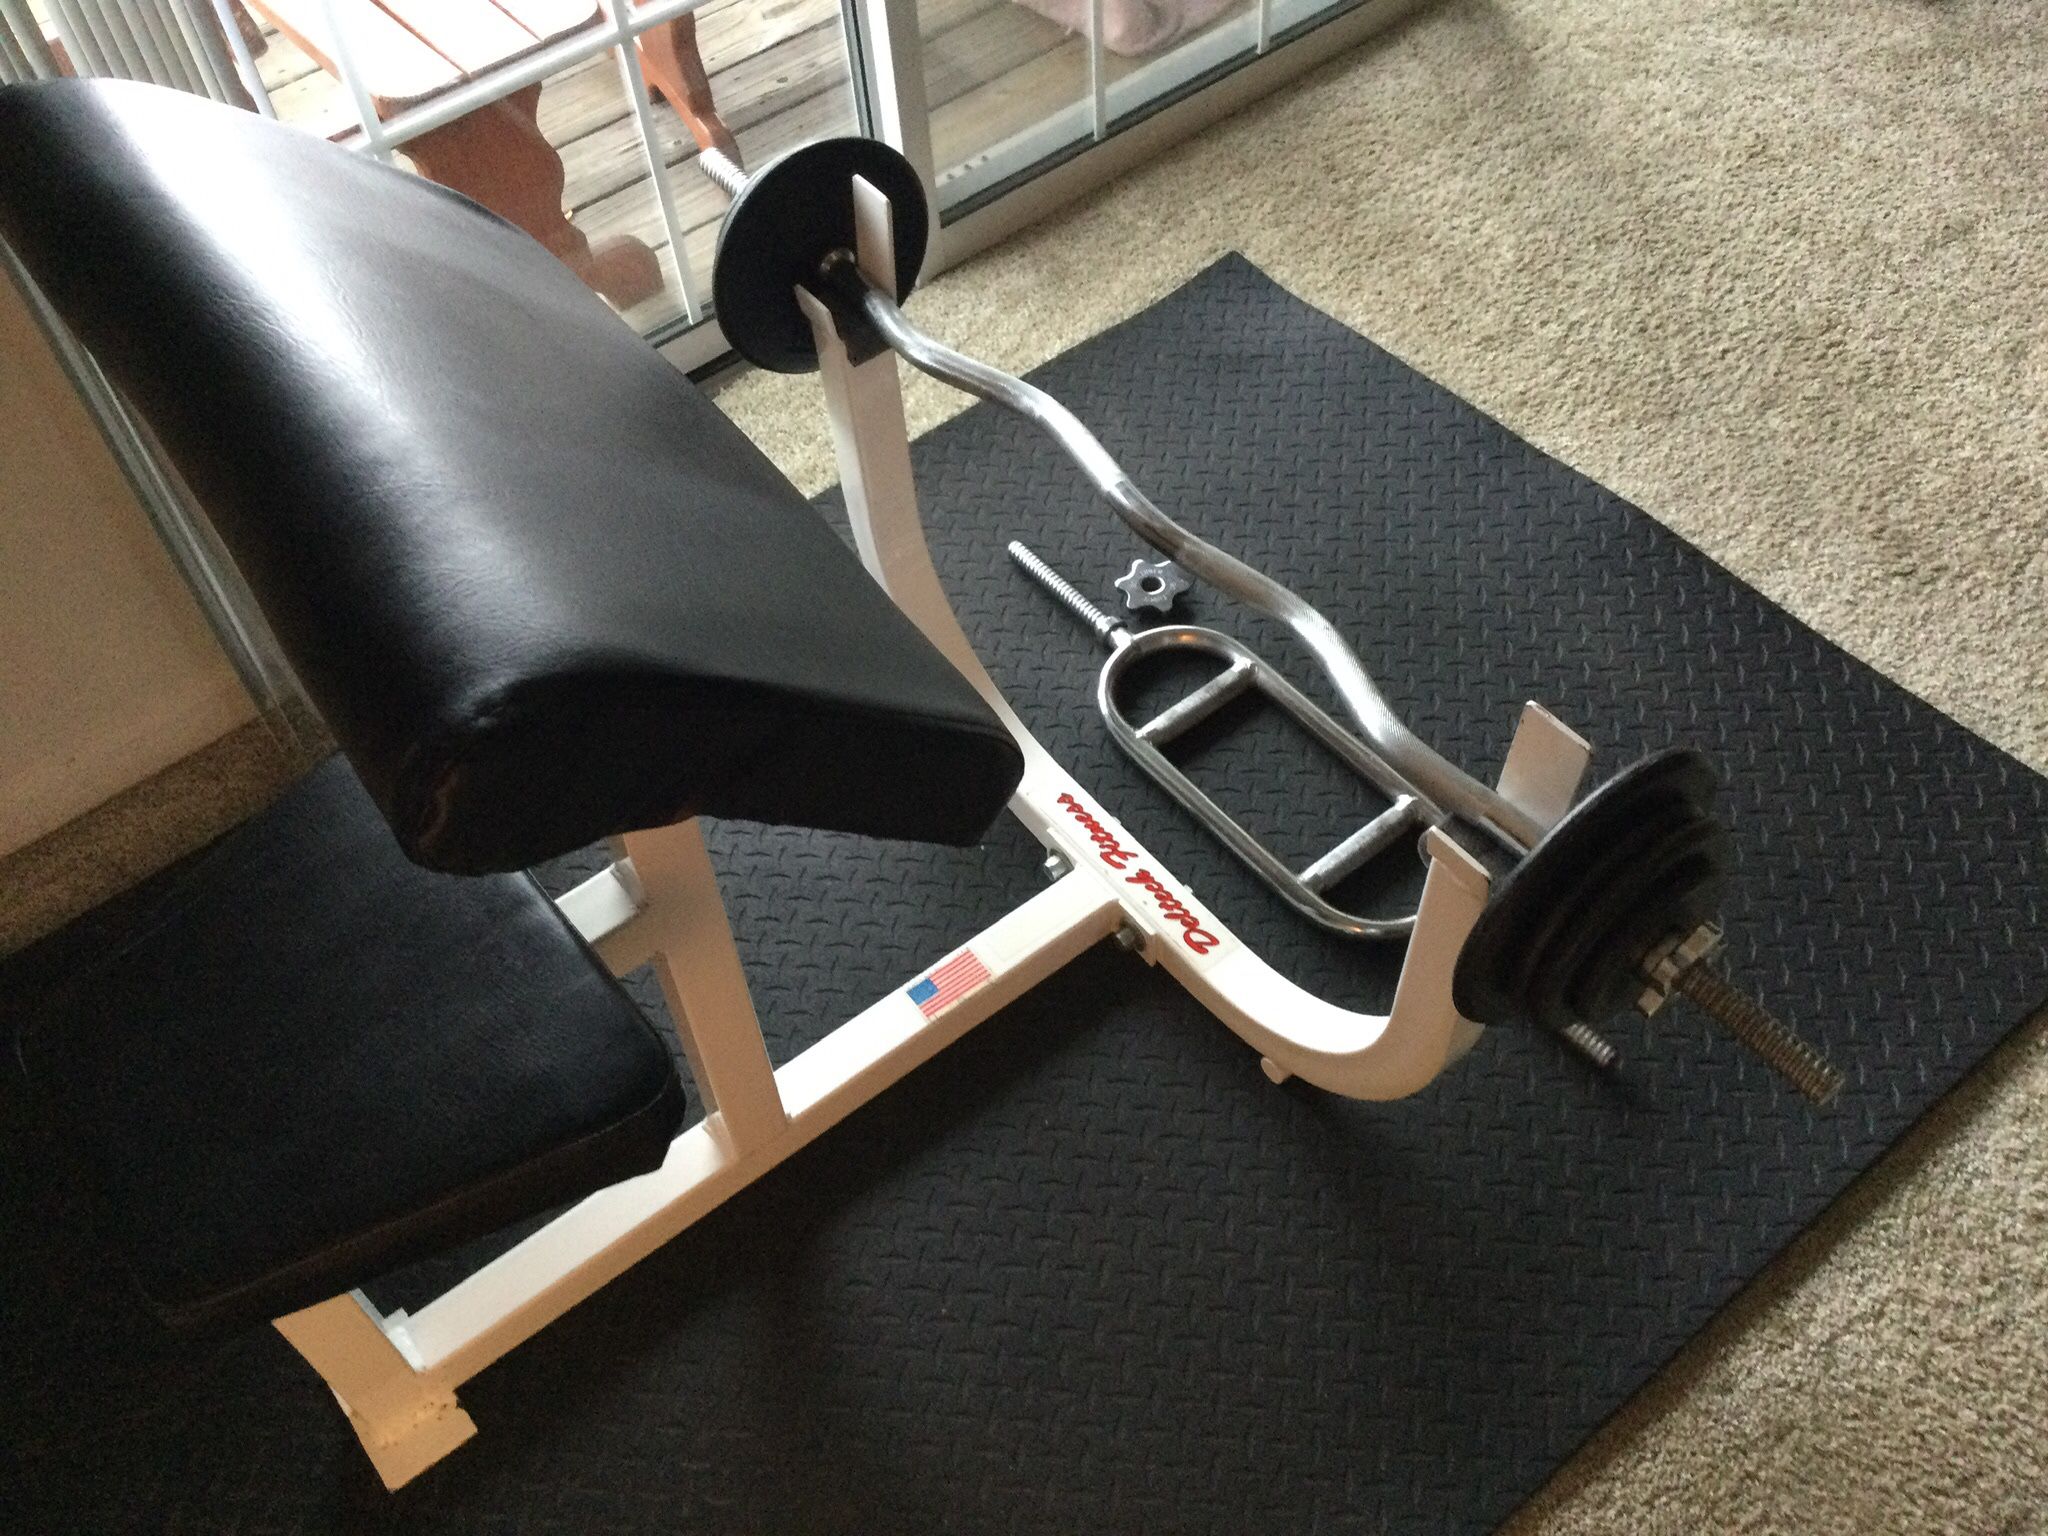 Preacher Curl Weight Bench With 2 Barbells And Standard Weights